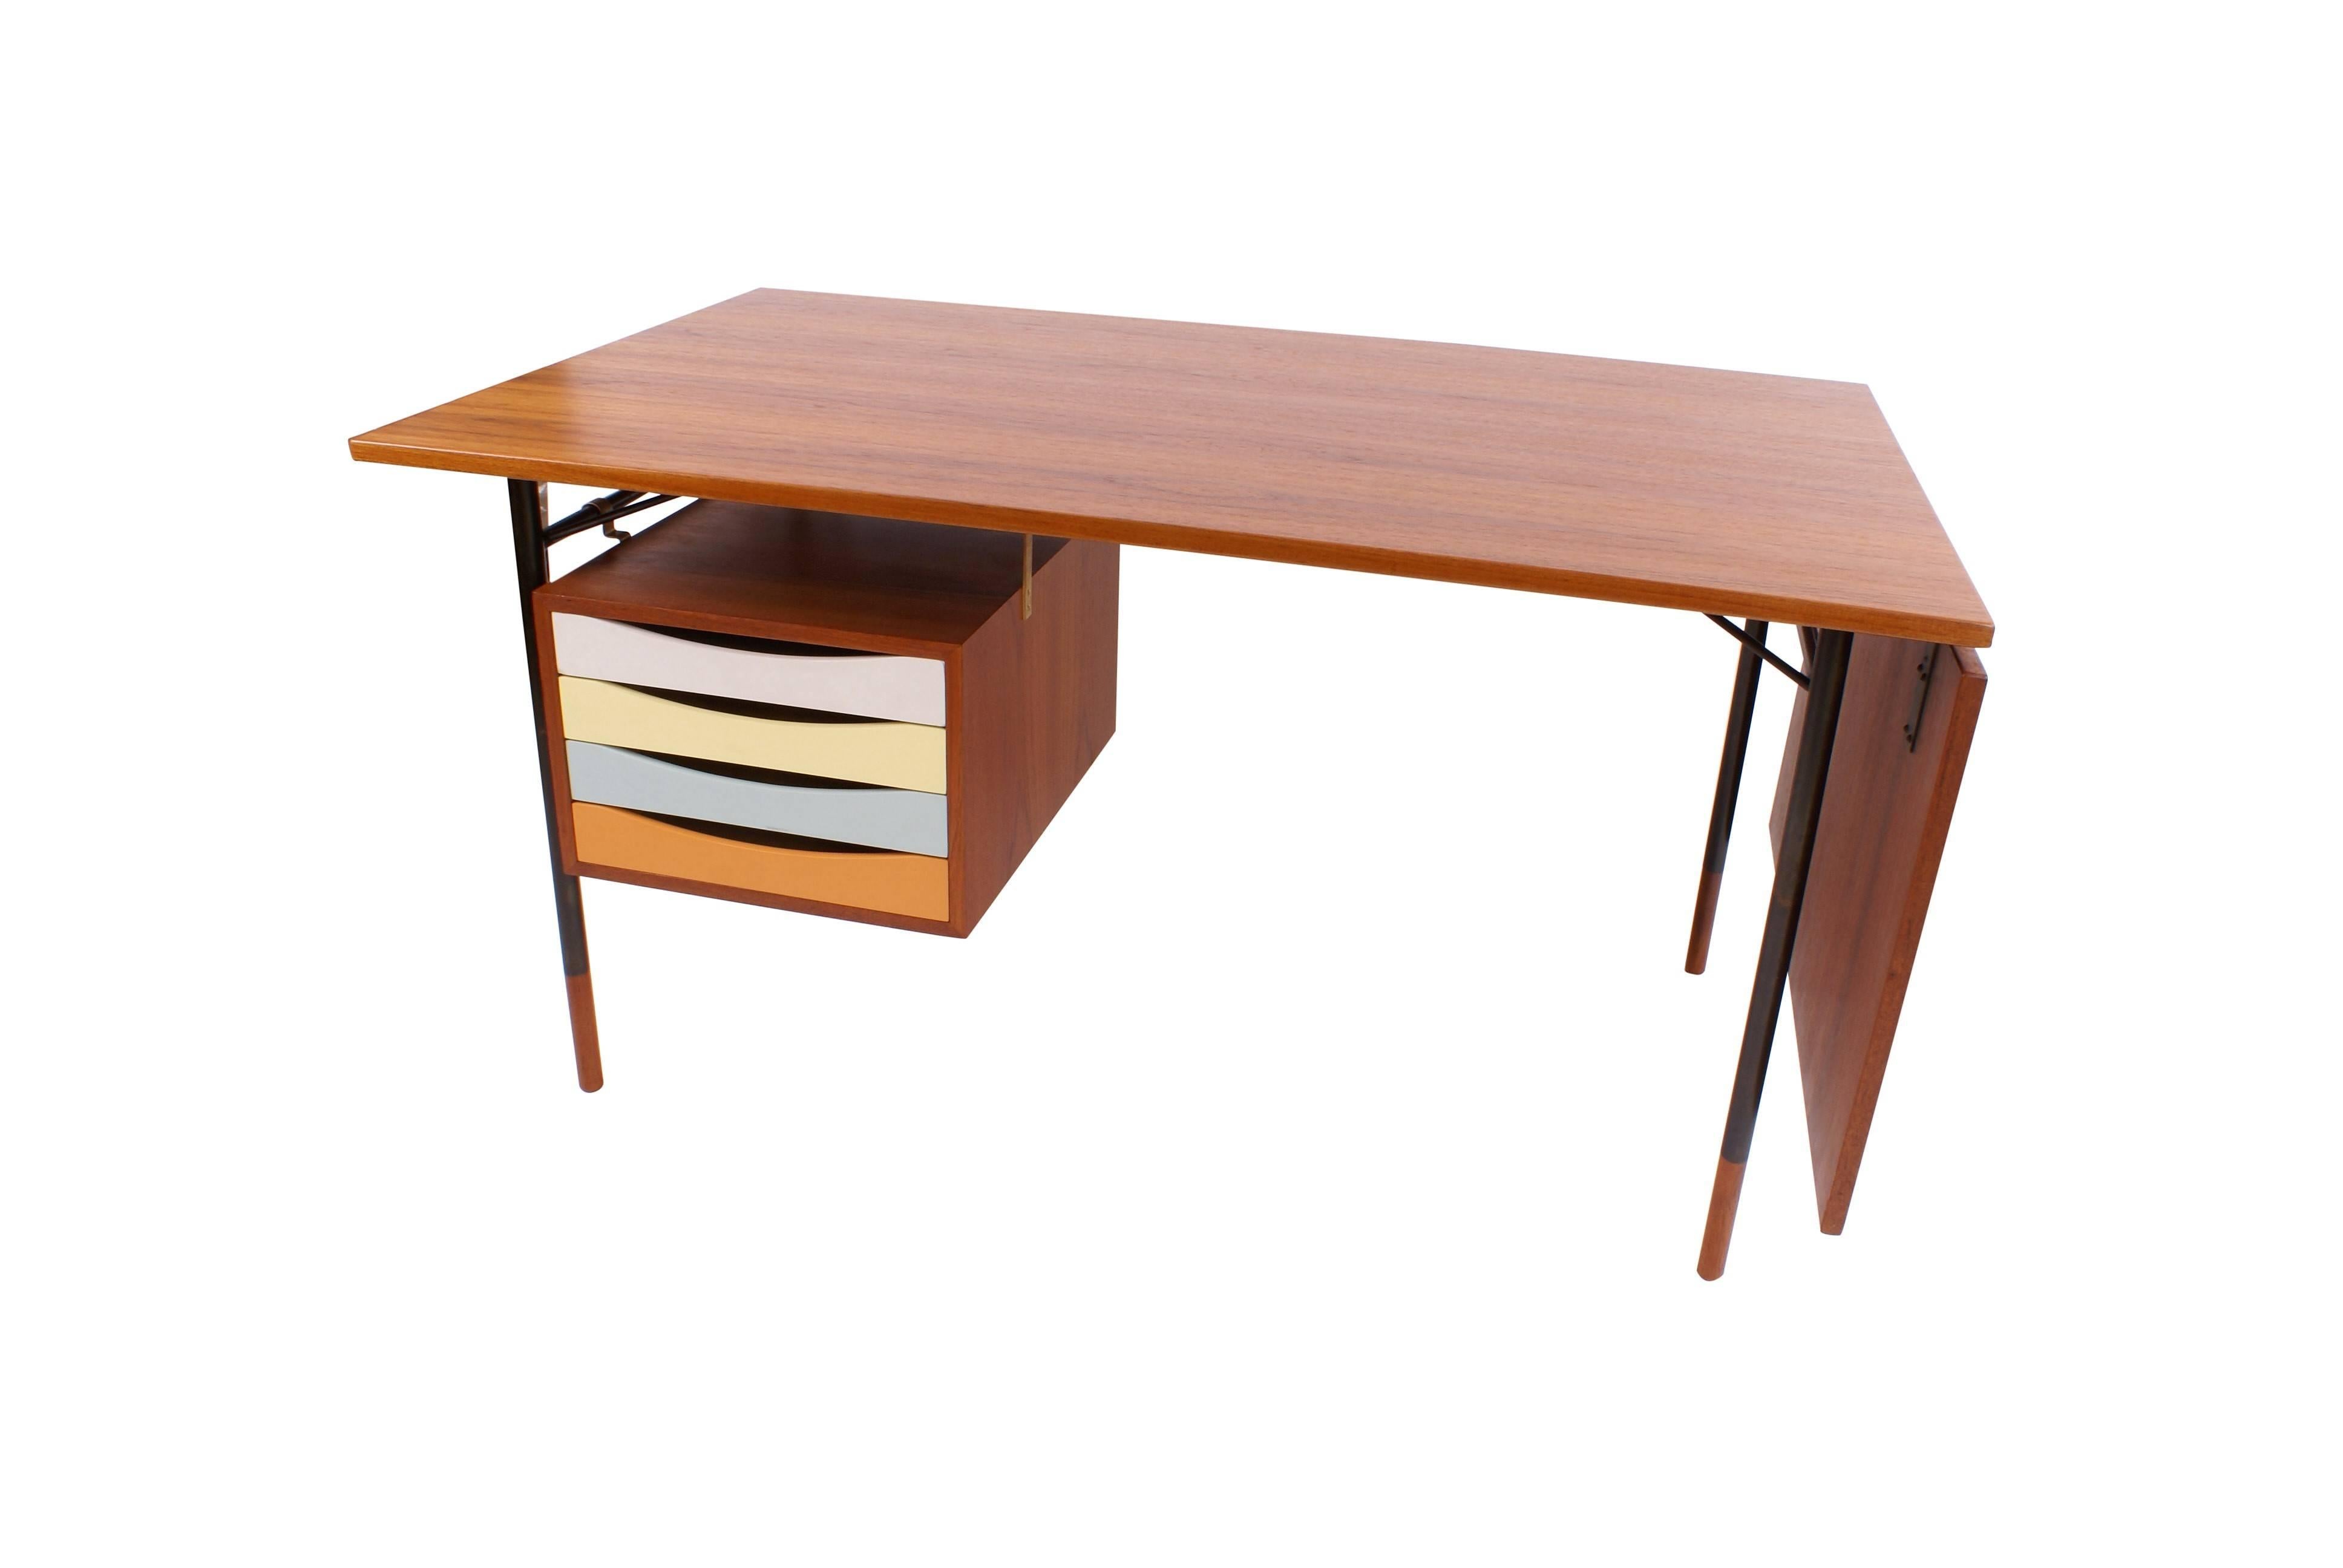 Finn Juhl freestanding teak writing desk with detachable flip-down leaf. Drawer section with four polychrome lacquered drawers. Anodized metal frame with teak shoes. Designed 1953.

Literature: 